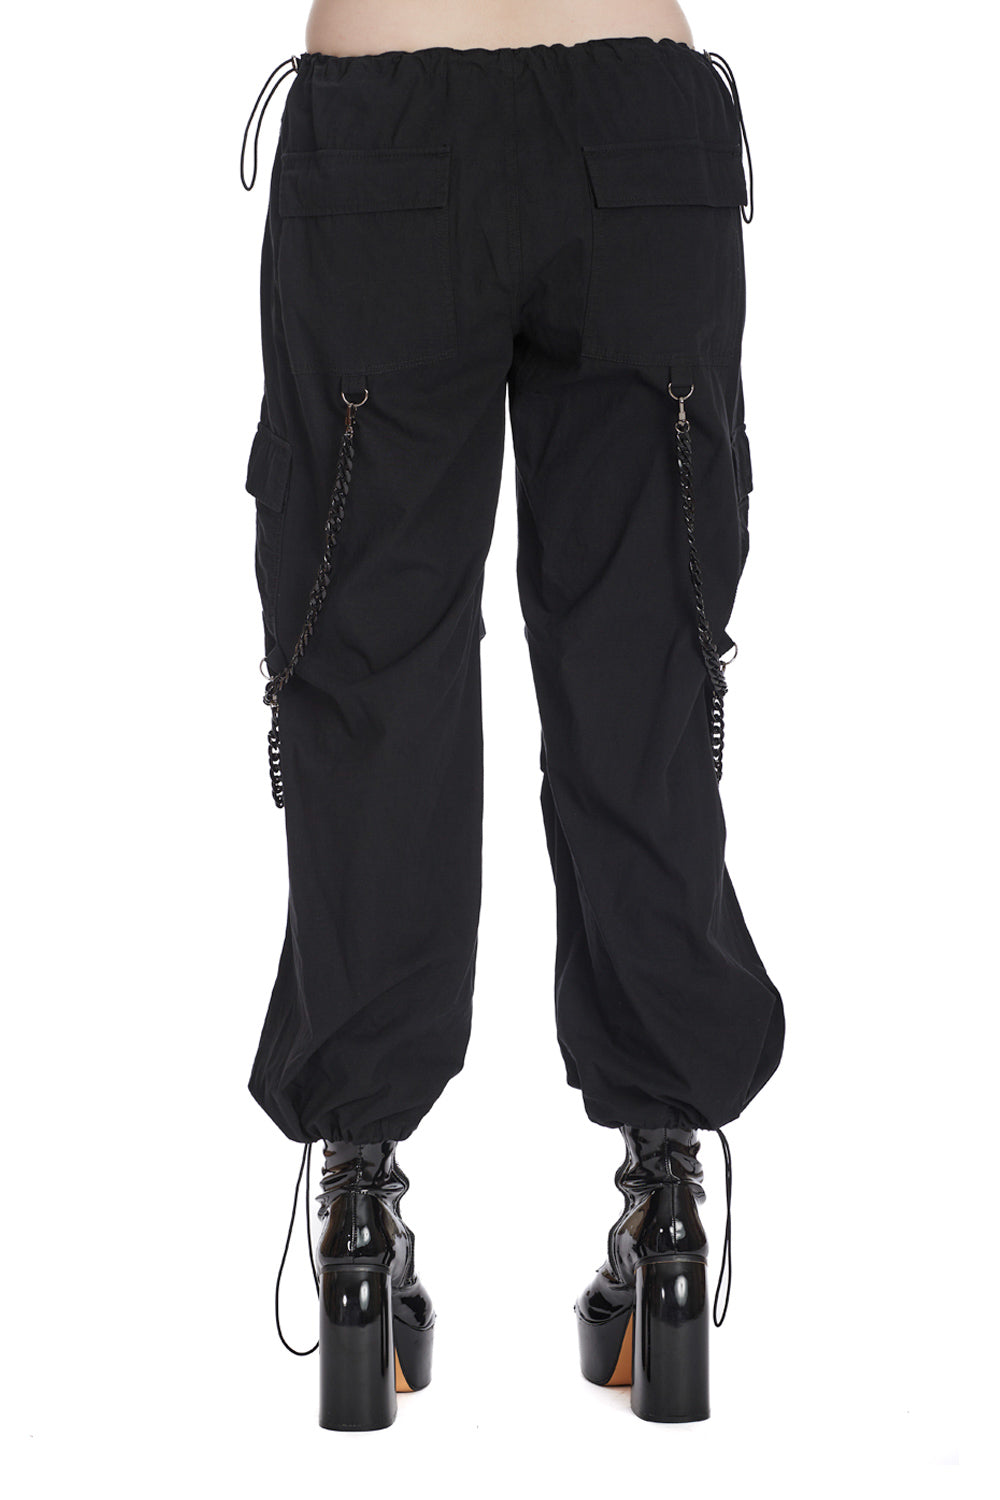 Banned Alternative RIOTUS TROUSERS